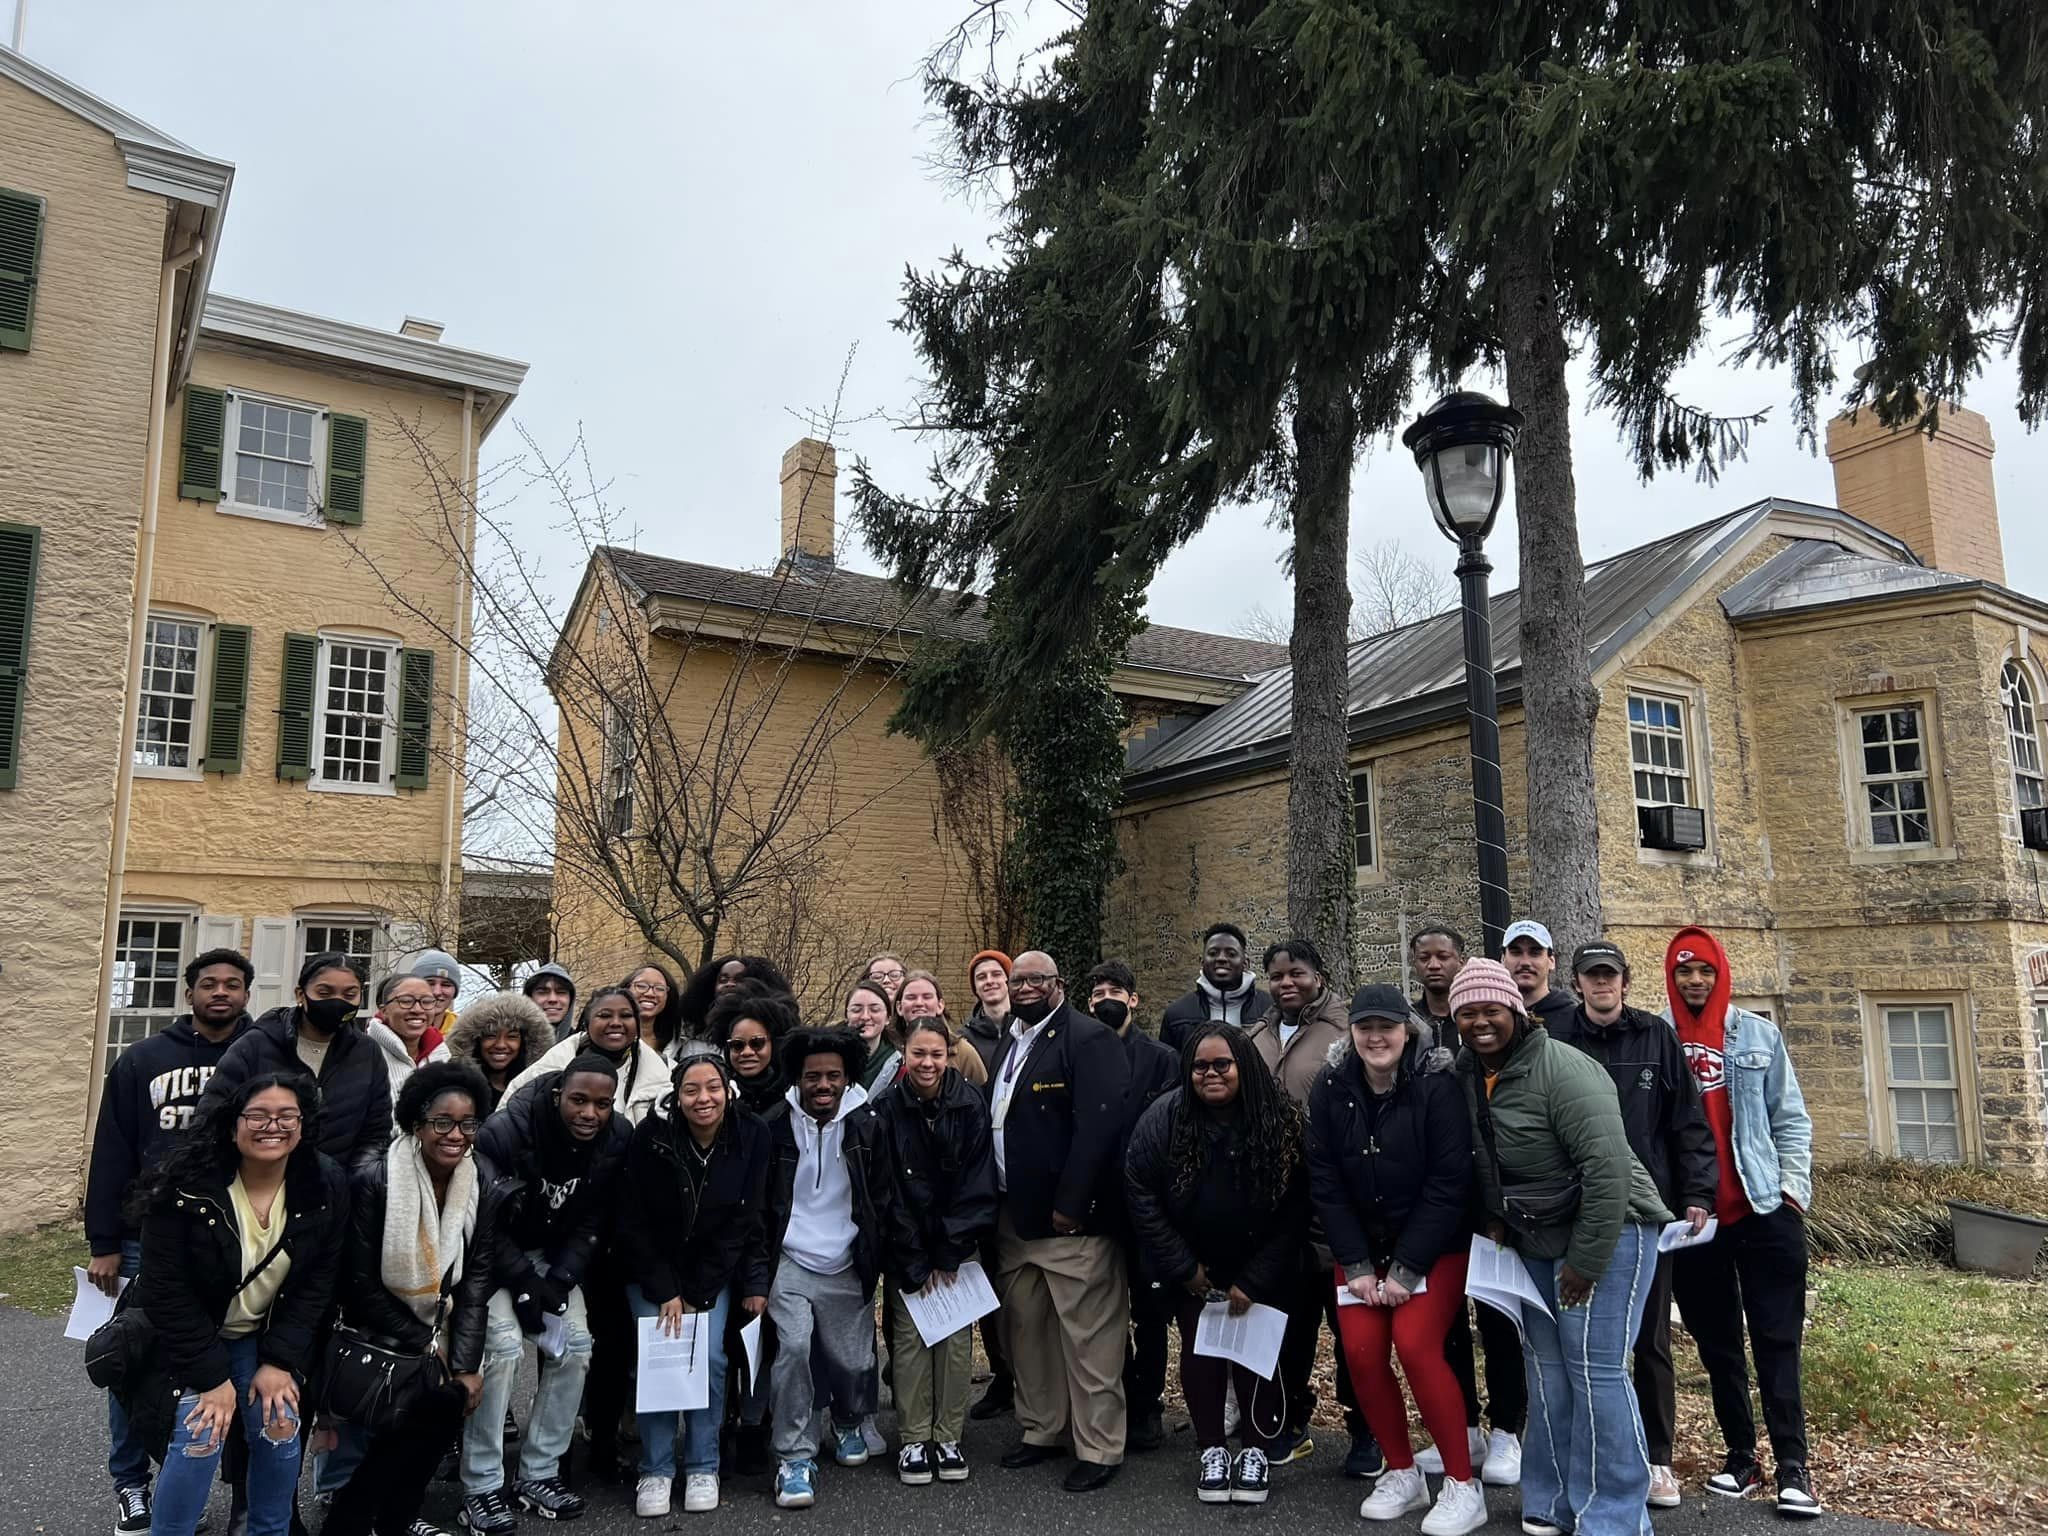 A photo of 31 students and staff members standing in front of building for their civil rights trip.